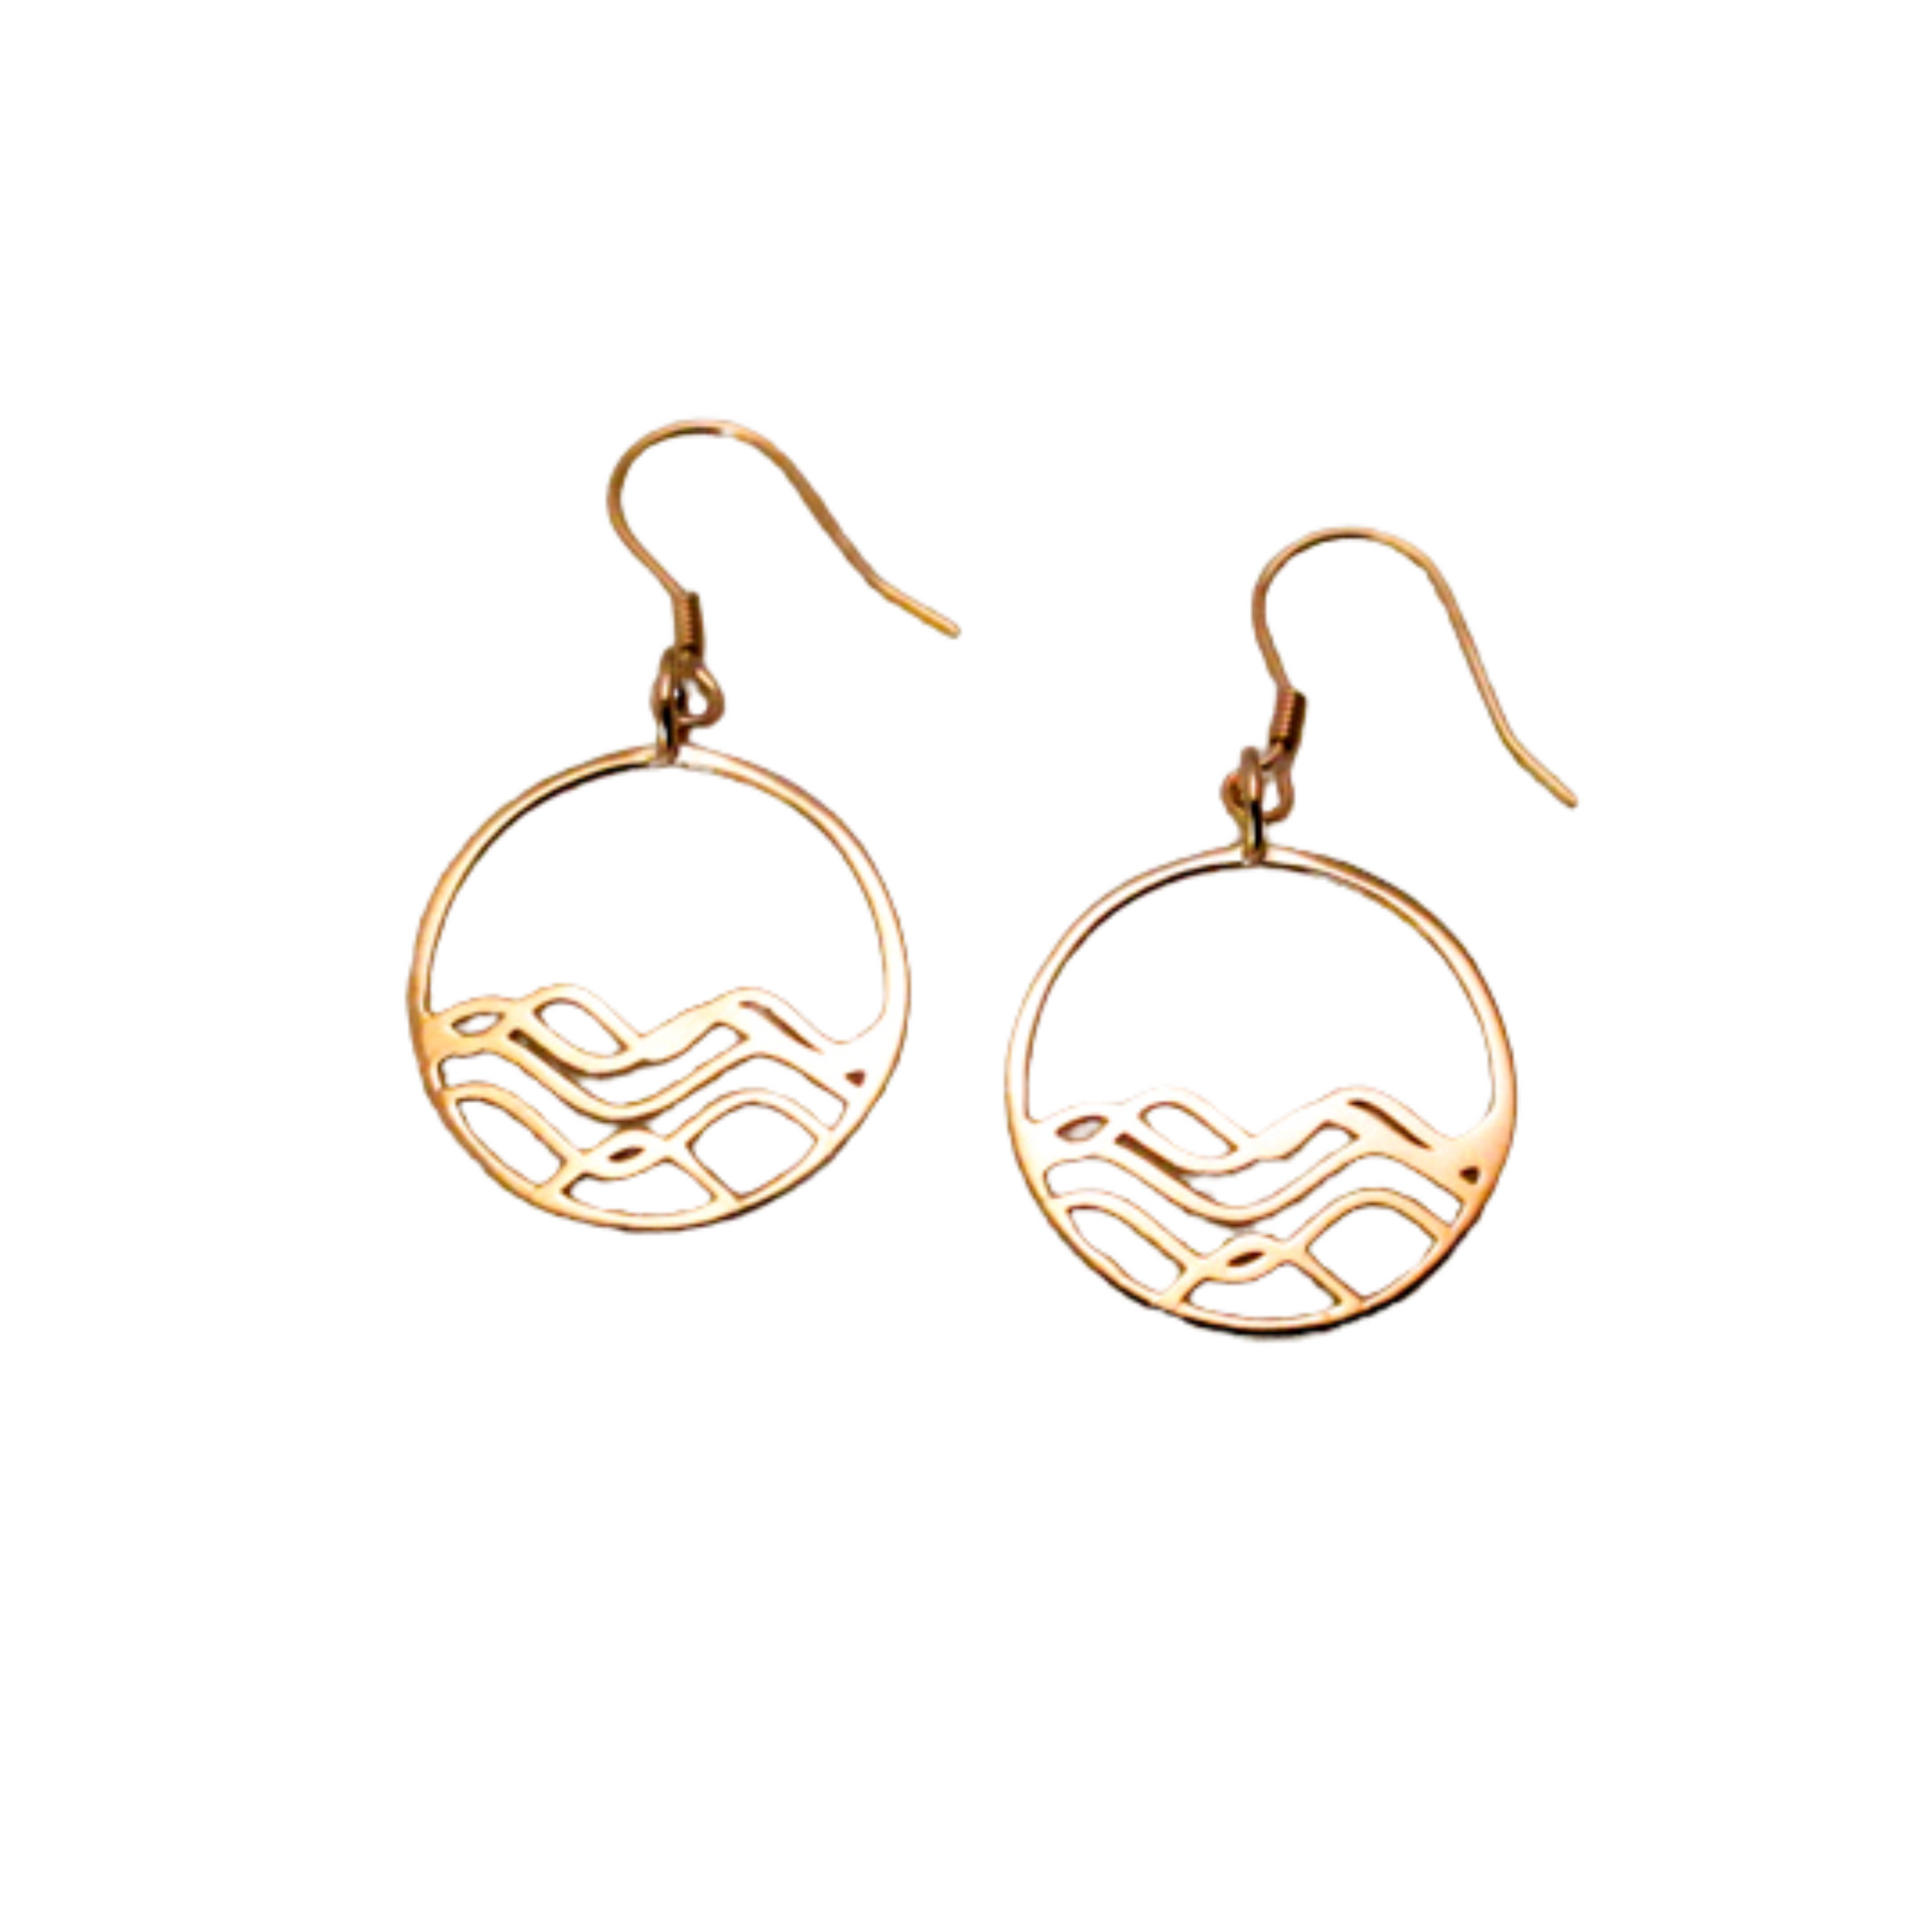 ocean inspired jewelry, 18k gold plated high tide in the circle shape dangle earrings